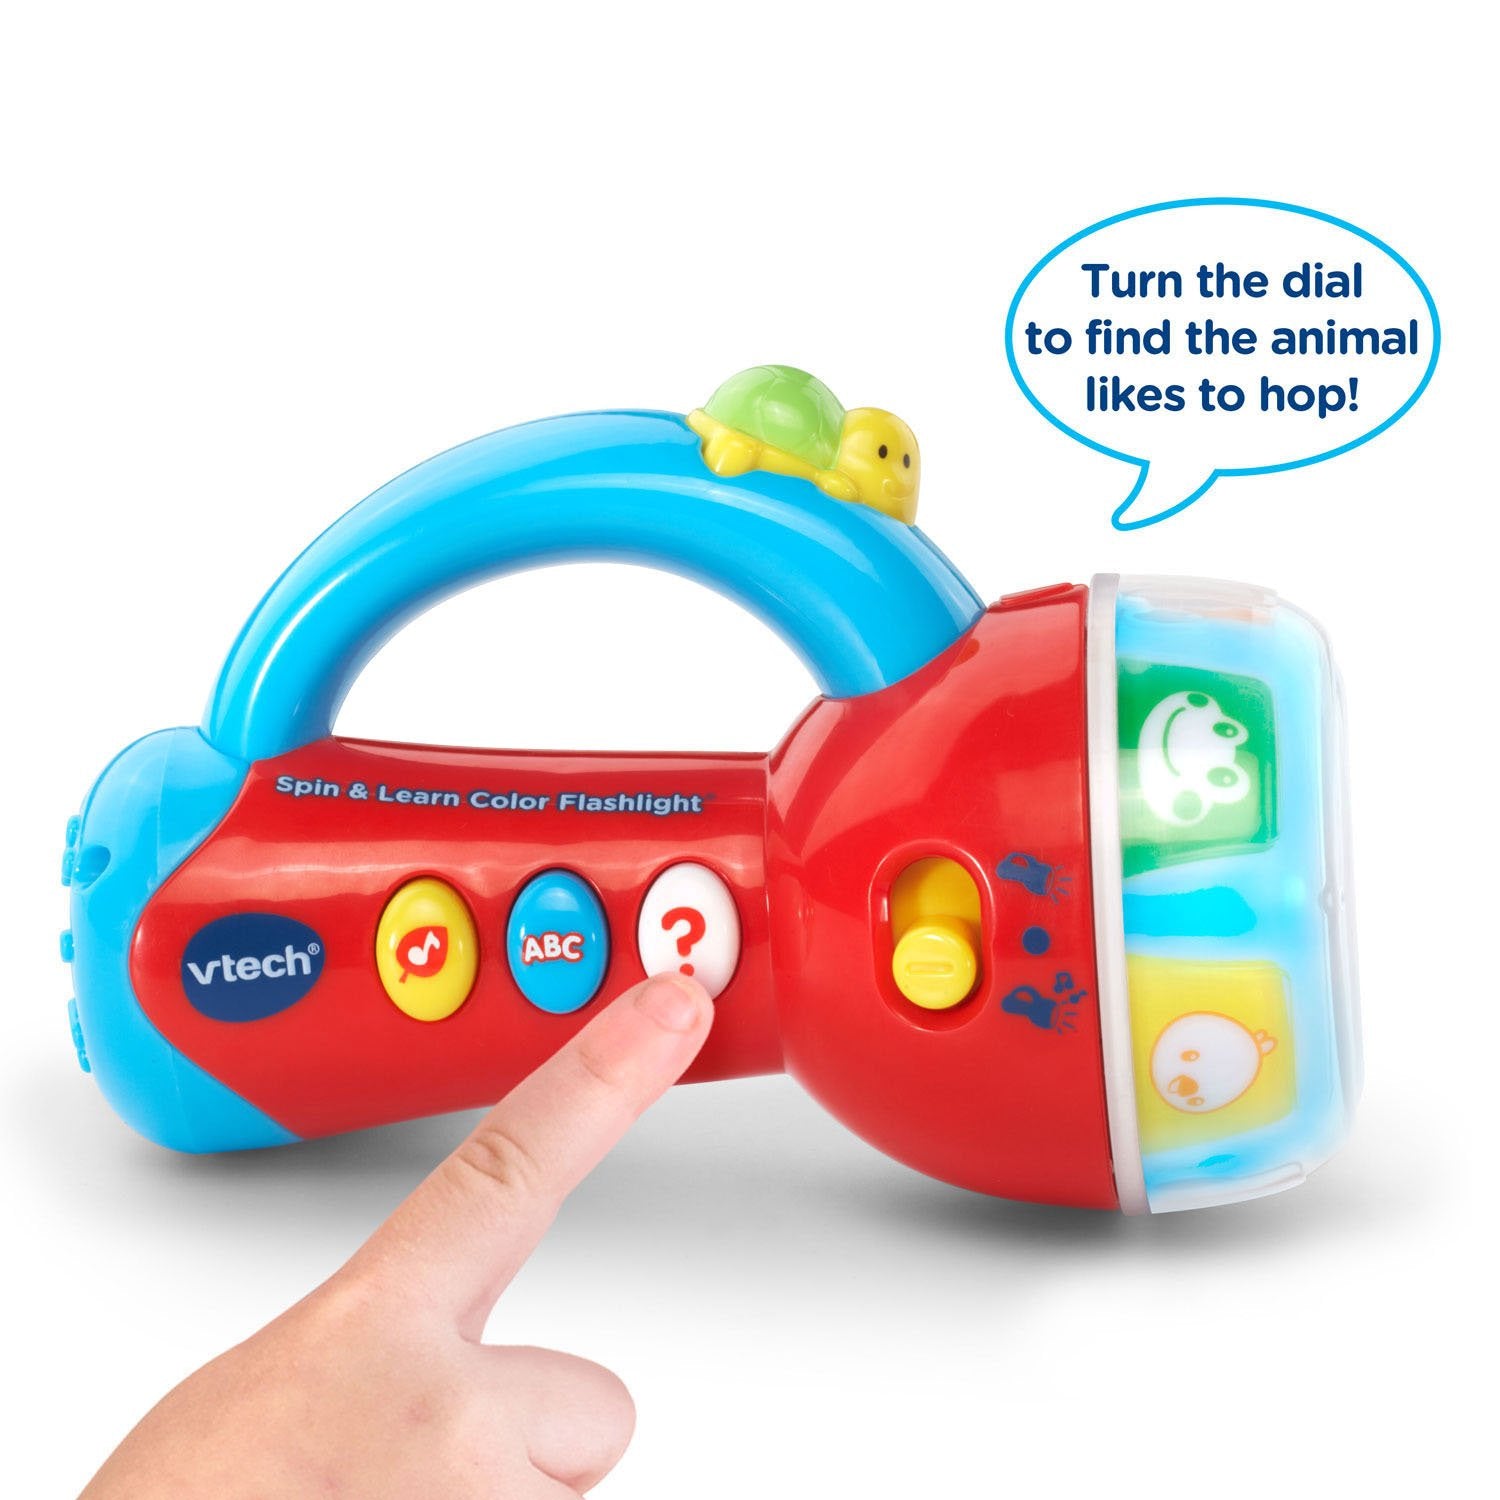 VTech Spin & Learn Color Flashlight, Red